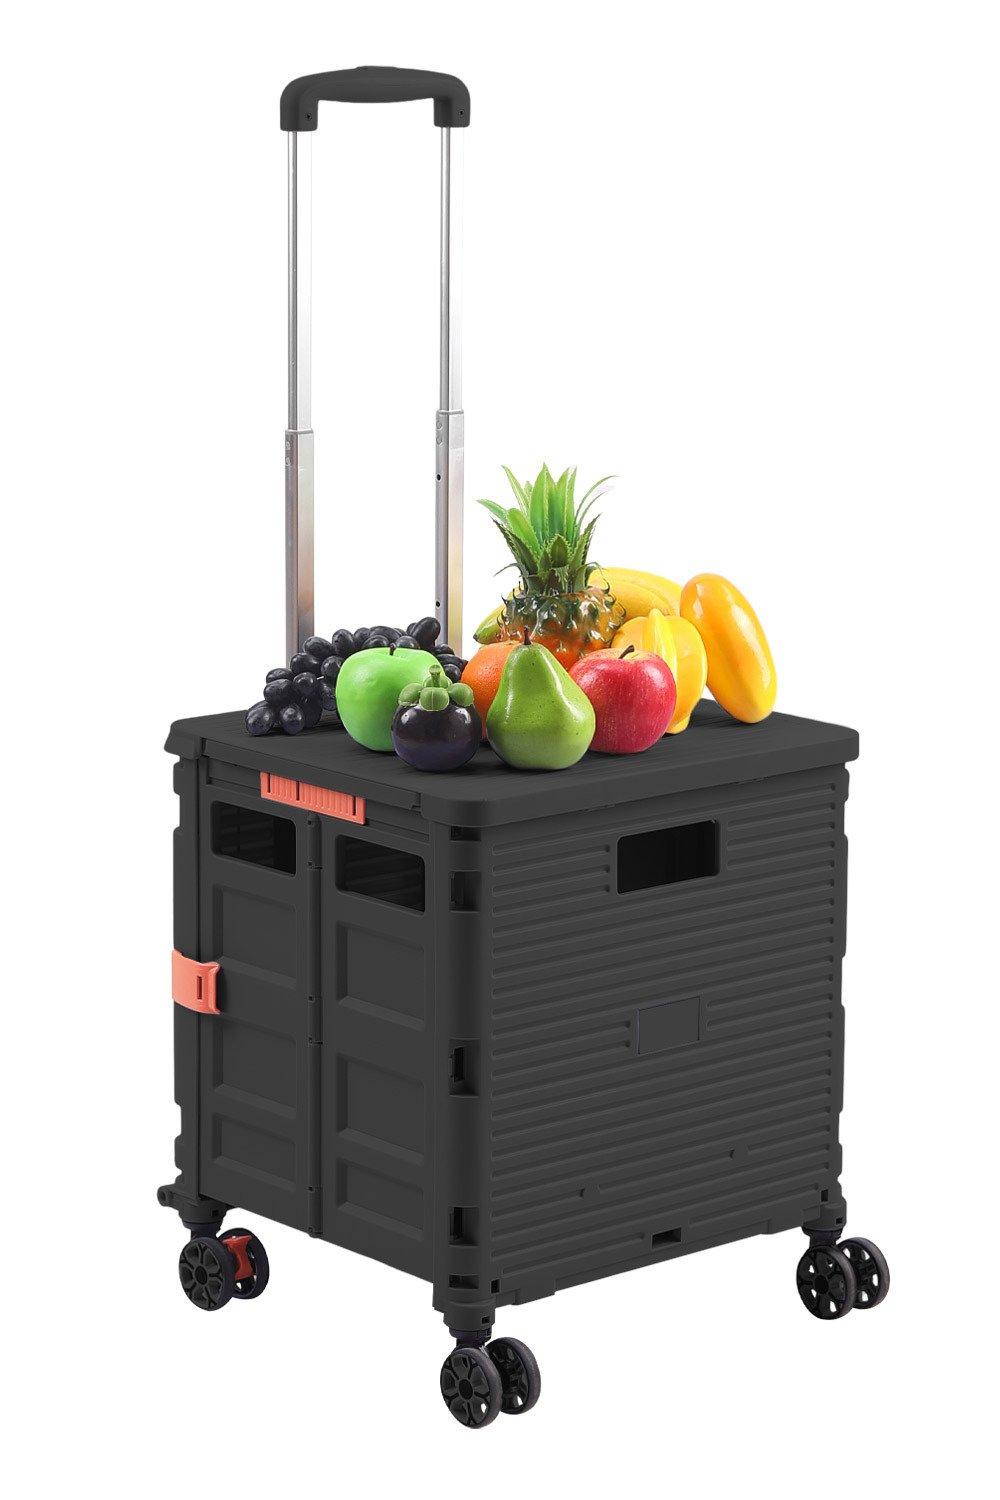 Foldable Utility Cart Collapsible Portable Crate Rolling Carts with Wheels